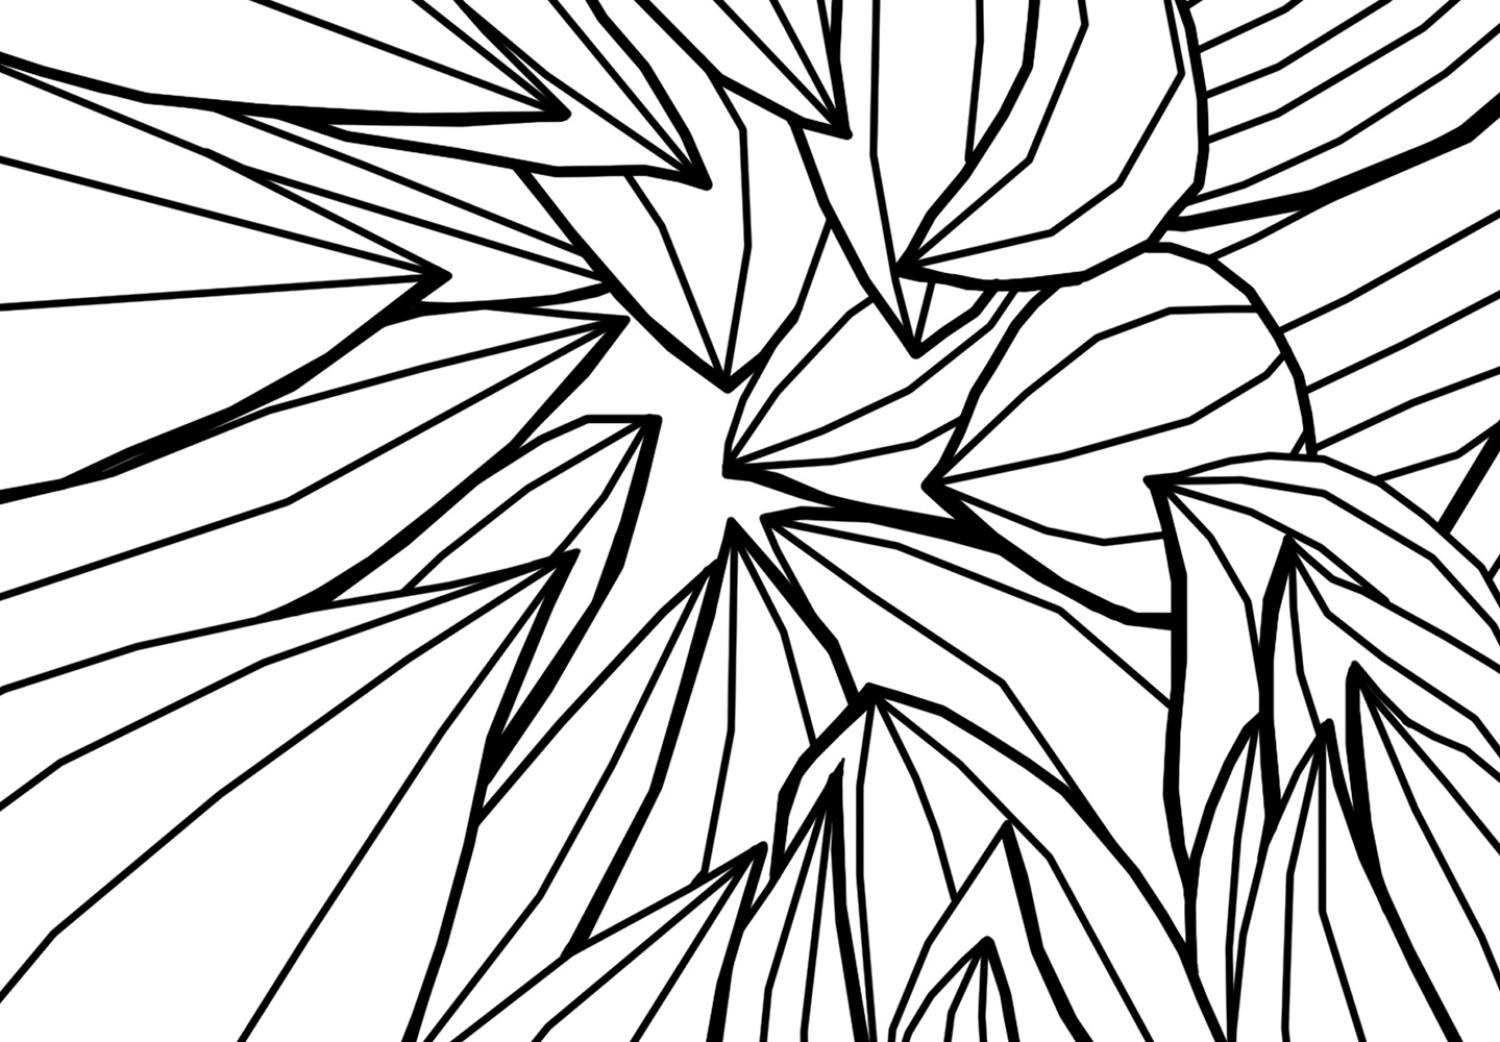 Canvas Peony flower bud - black and white plant contours in line art style